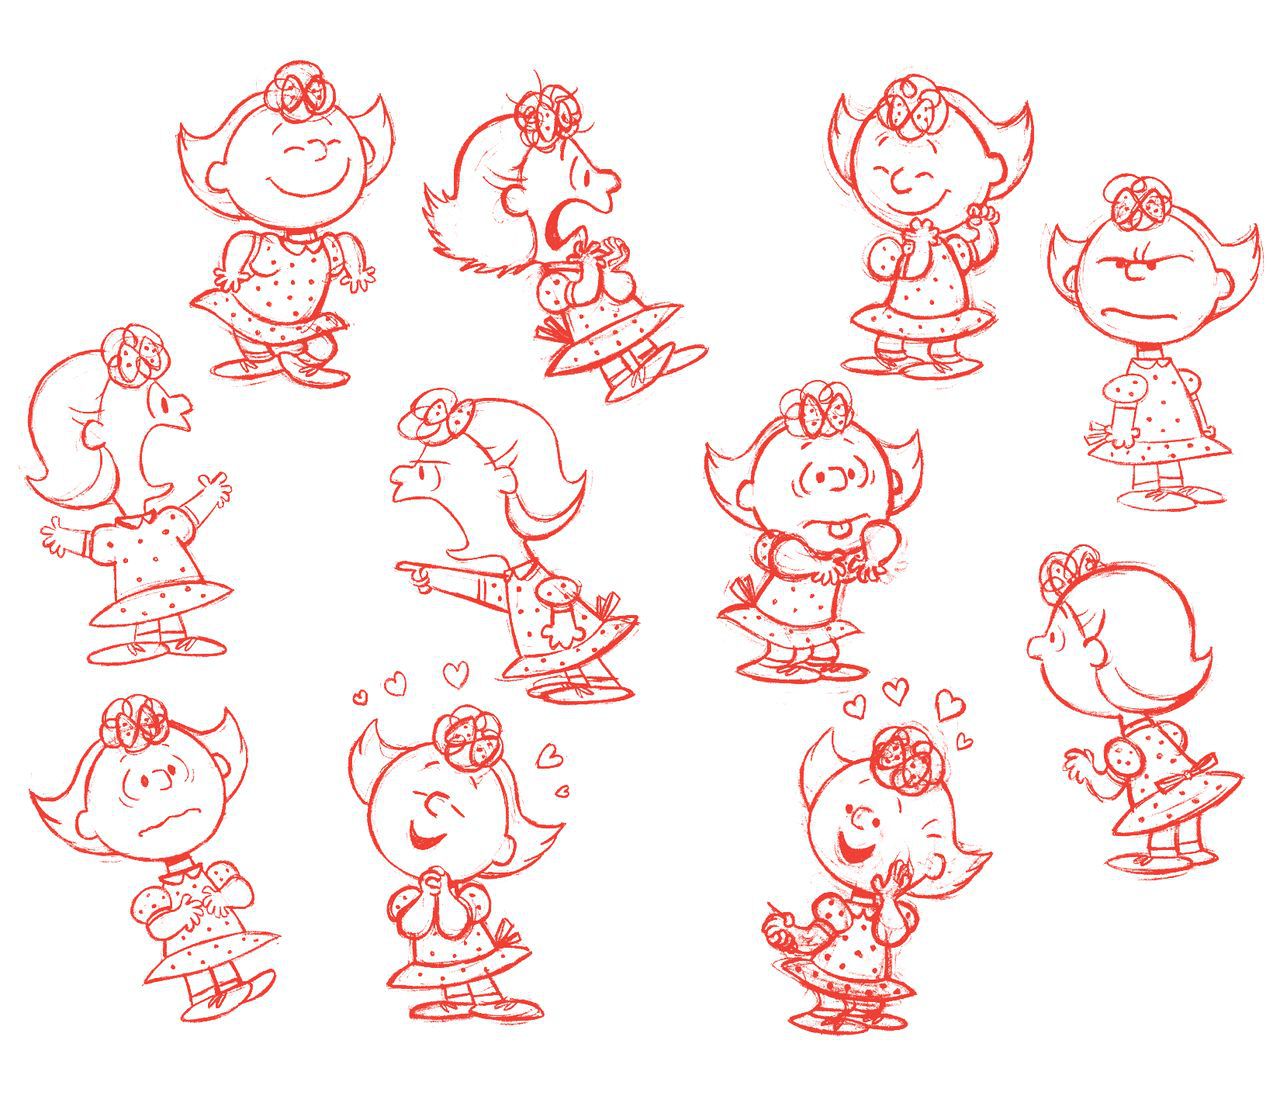 The Art and Making of Peanuts Animation 2